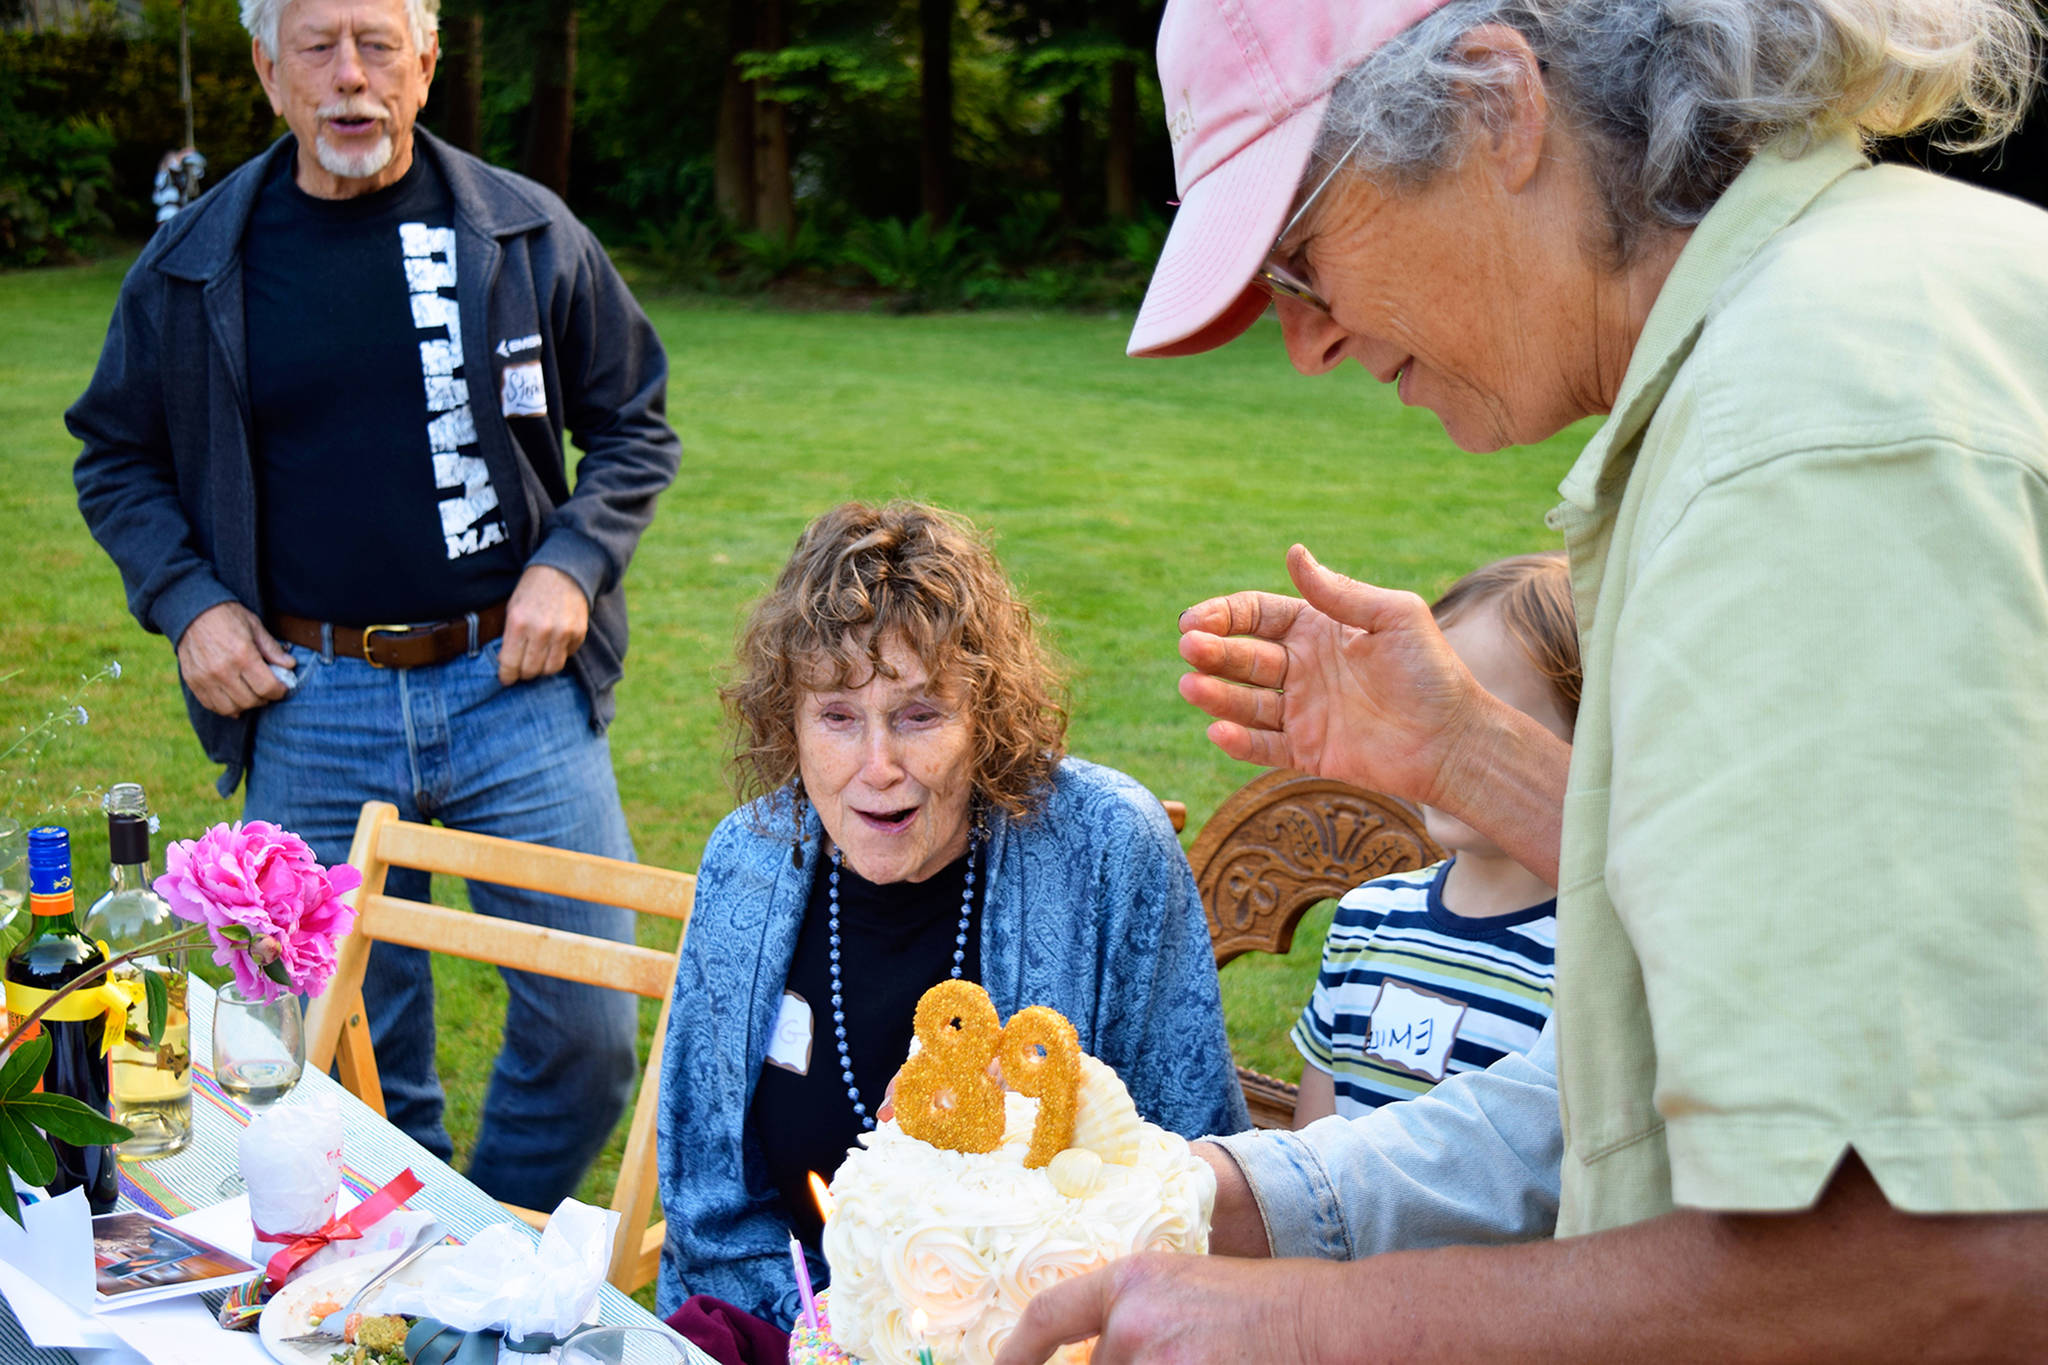 Cary Peterson (right) presents her mother, Meg Noble Peterson, with a birthday cake Saturday at a Langley neighborhoodpicnic. Peterson, who just turned 89, is representative of Whidbey Island’s ranking as a leader in longevity. Photos by Patricia Guthrie/South Whidbey Record